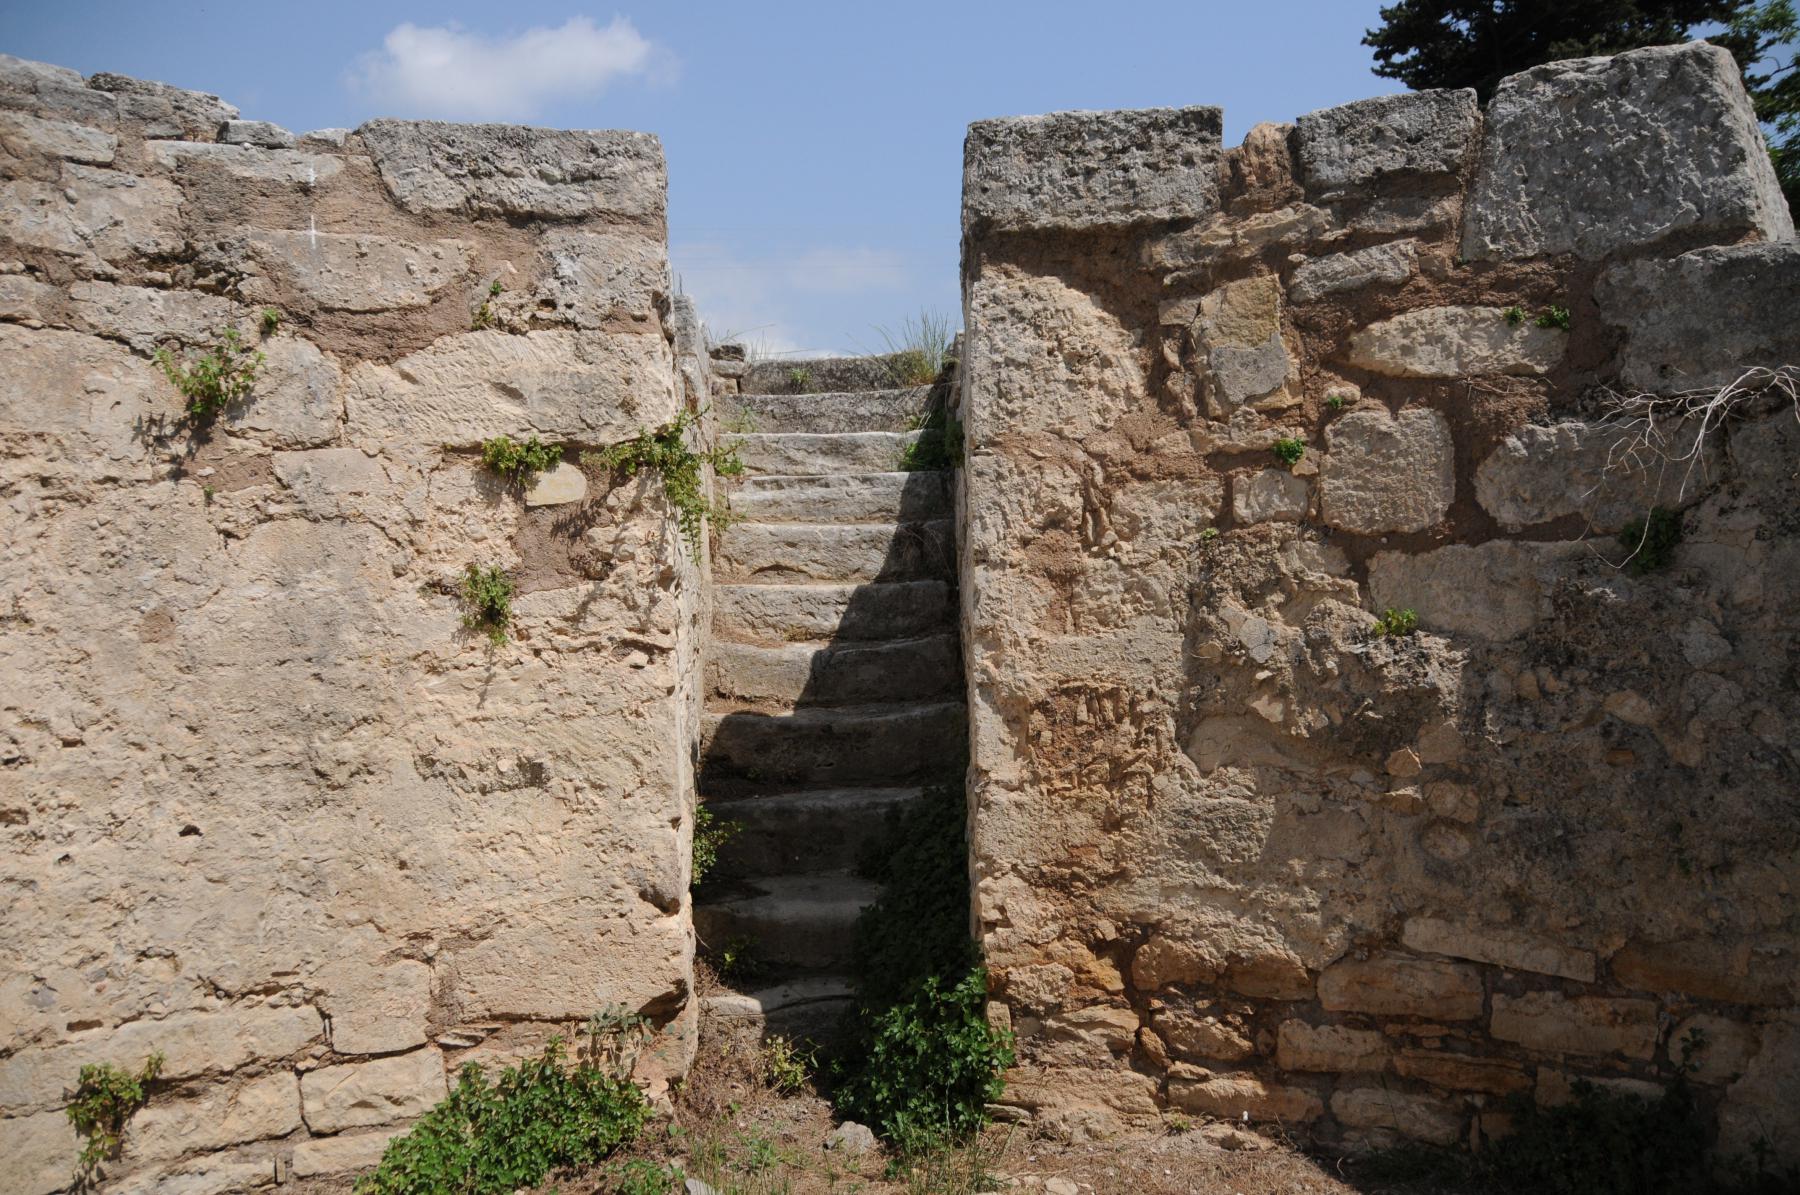 Stairs leading to a Minoan cistern used for the collection of spring water, circa 1330-1200 BCE. An aqueduct moved the supply across three kilometers, with charcoal-filled tubes for activated carbon filtration. The walls were plastered, holding roughly 100 cubic meters of liquid. Tylissos, Crete.